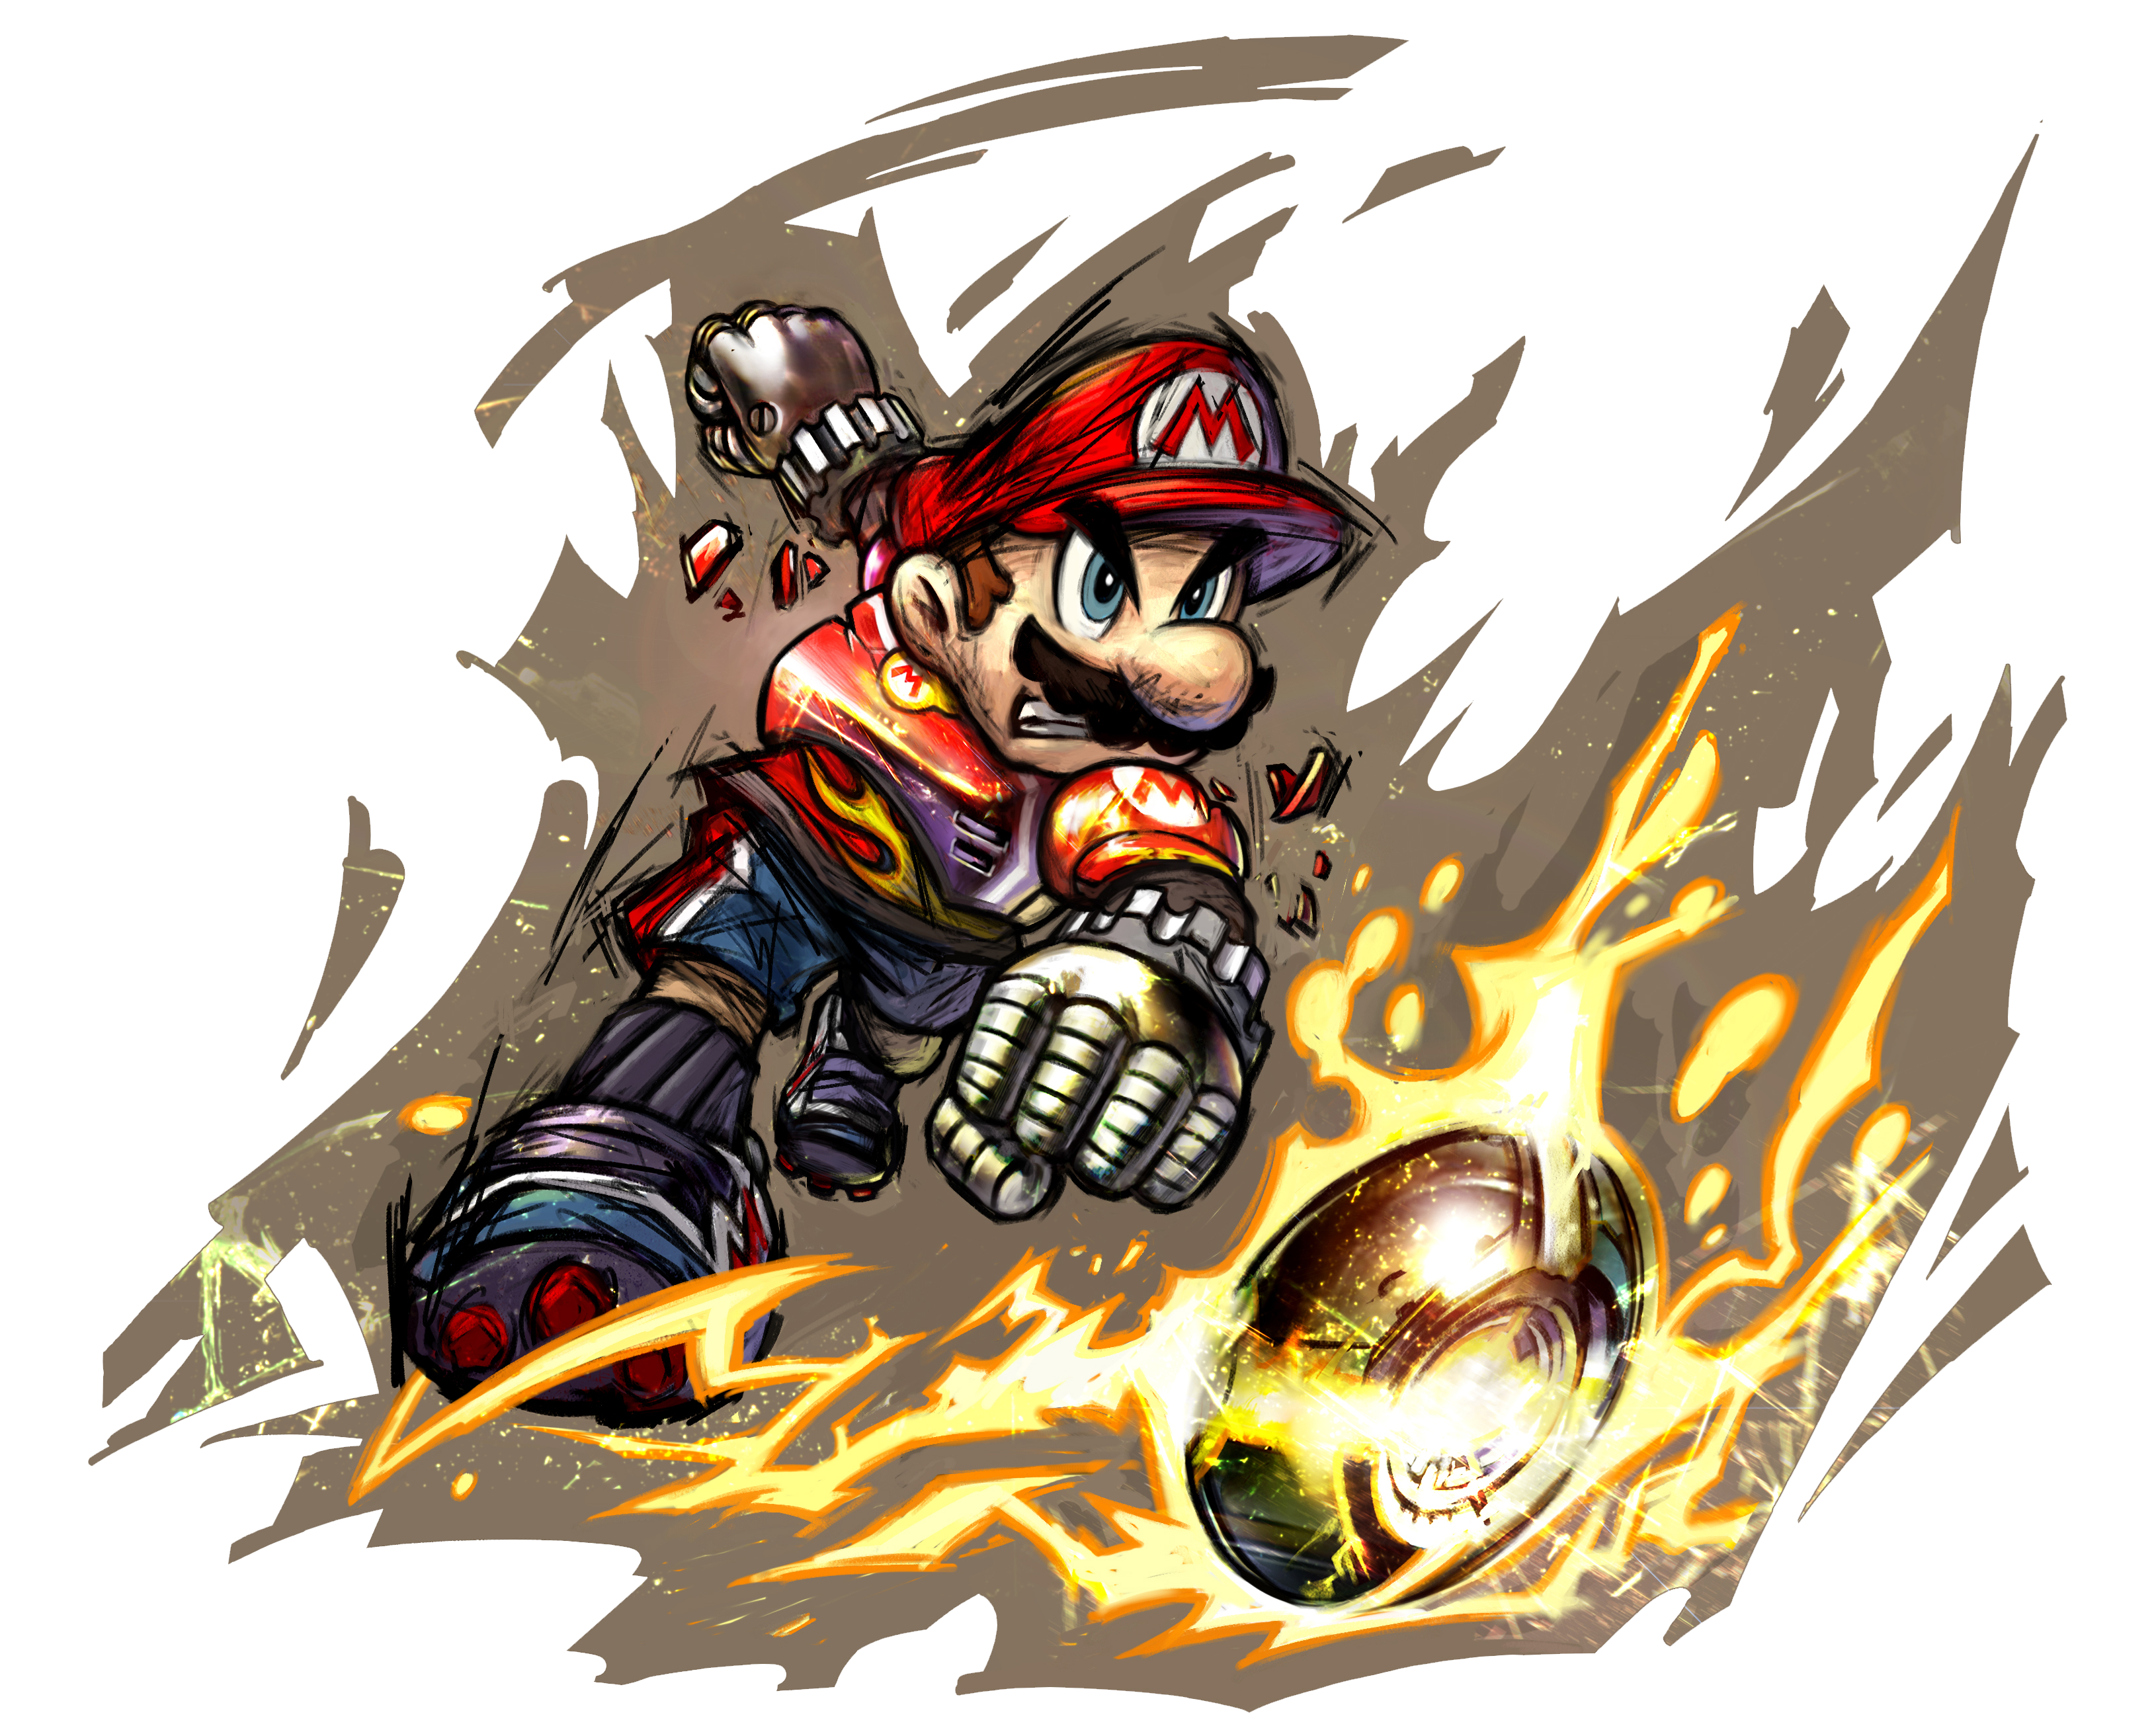 how to download super mario strikers pc